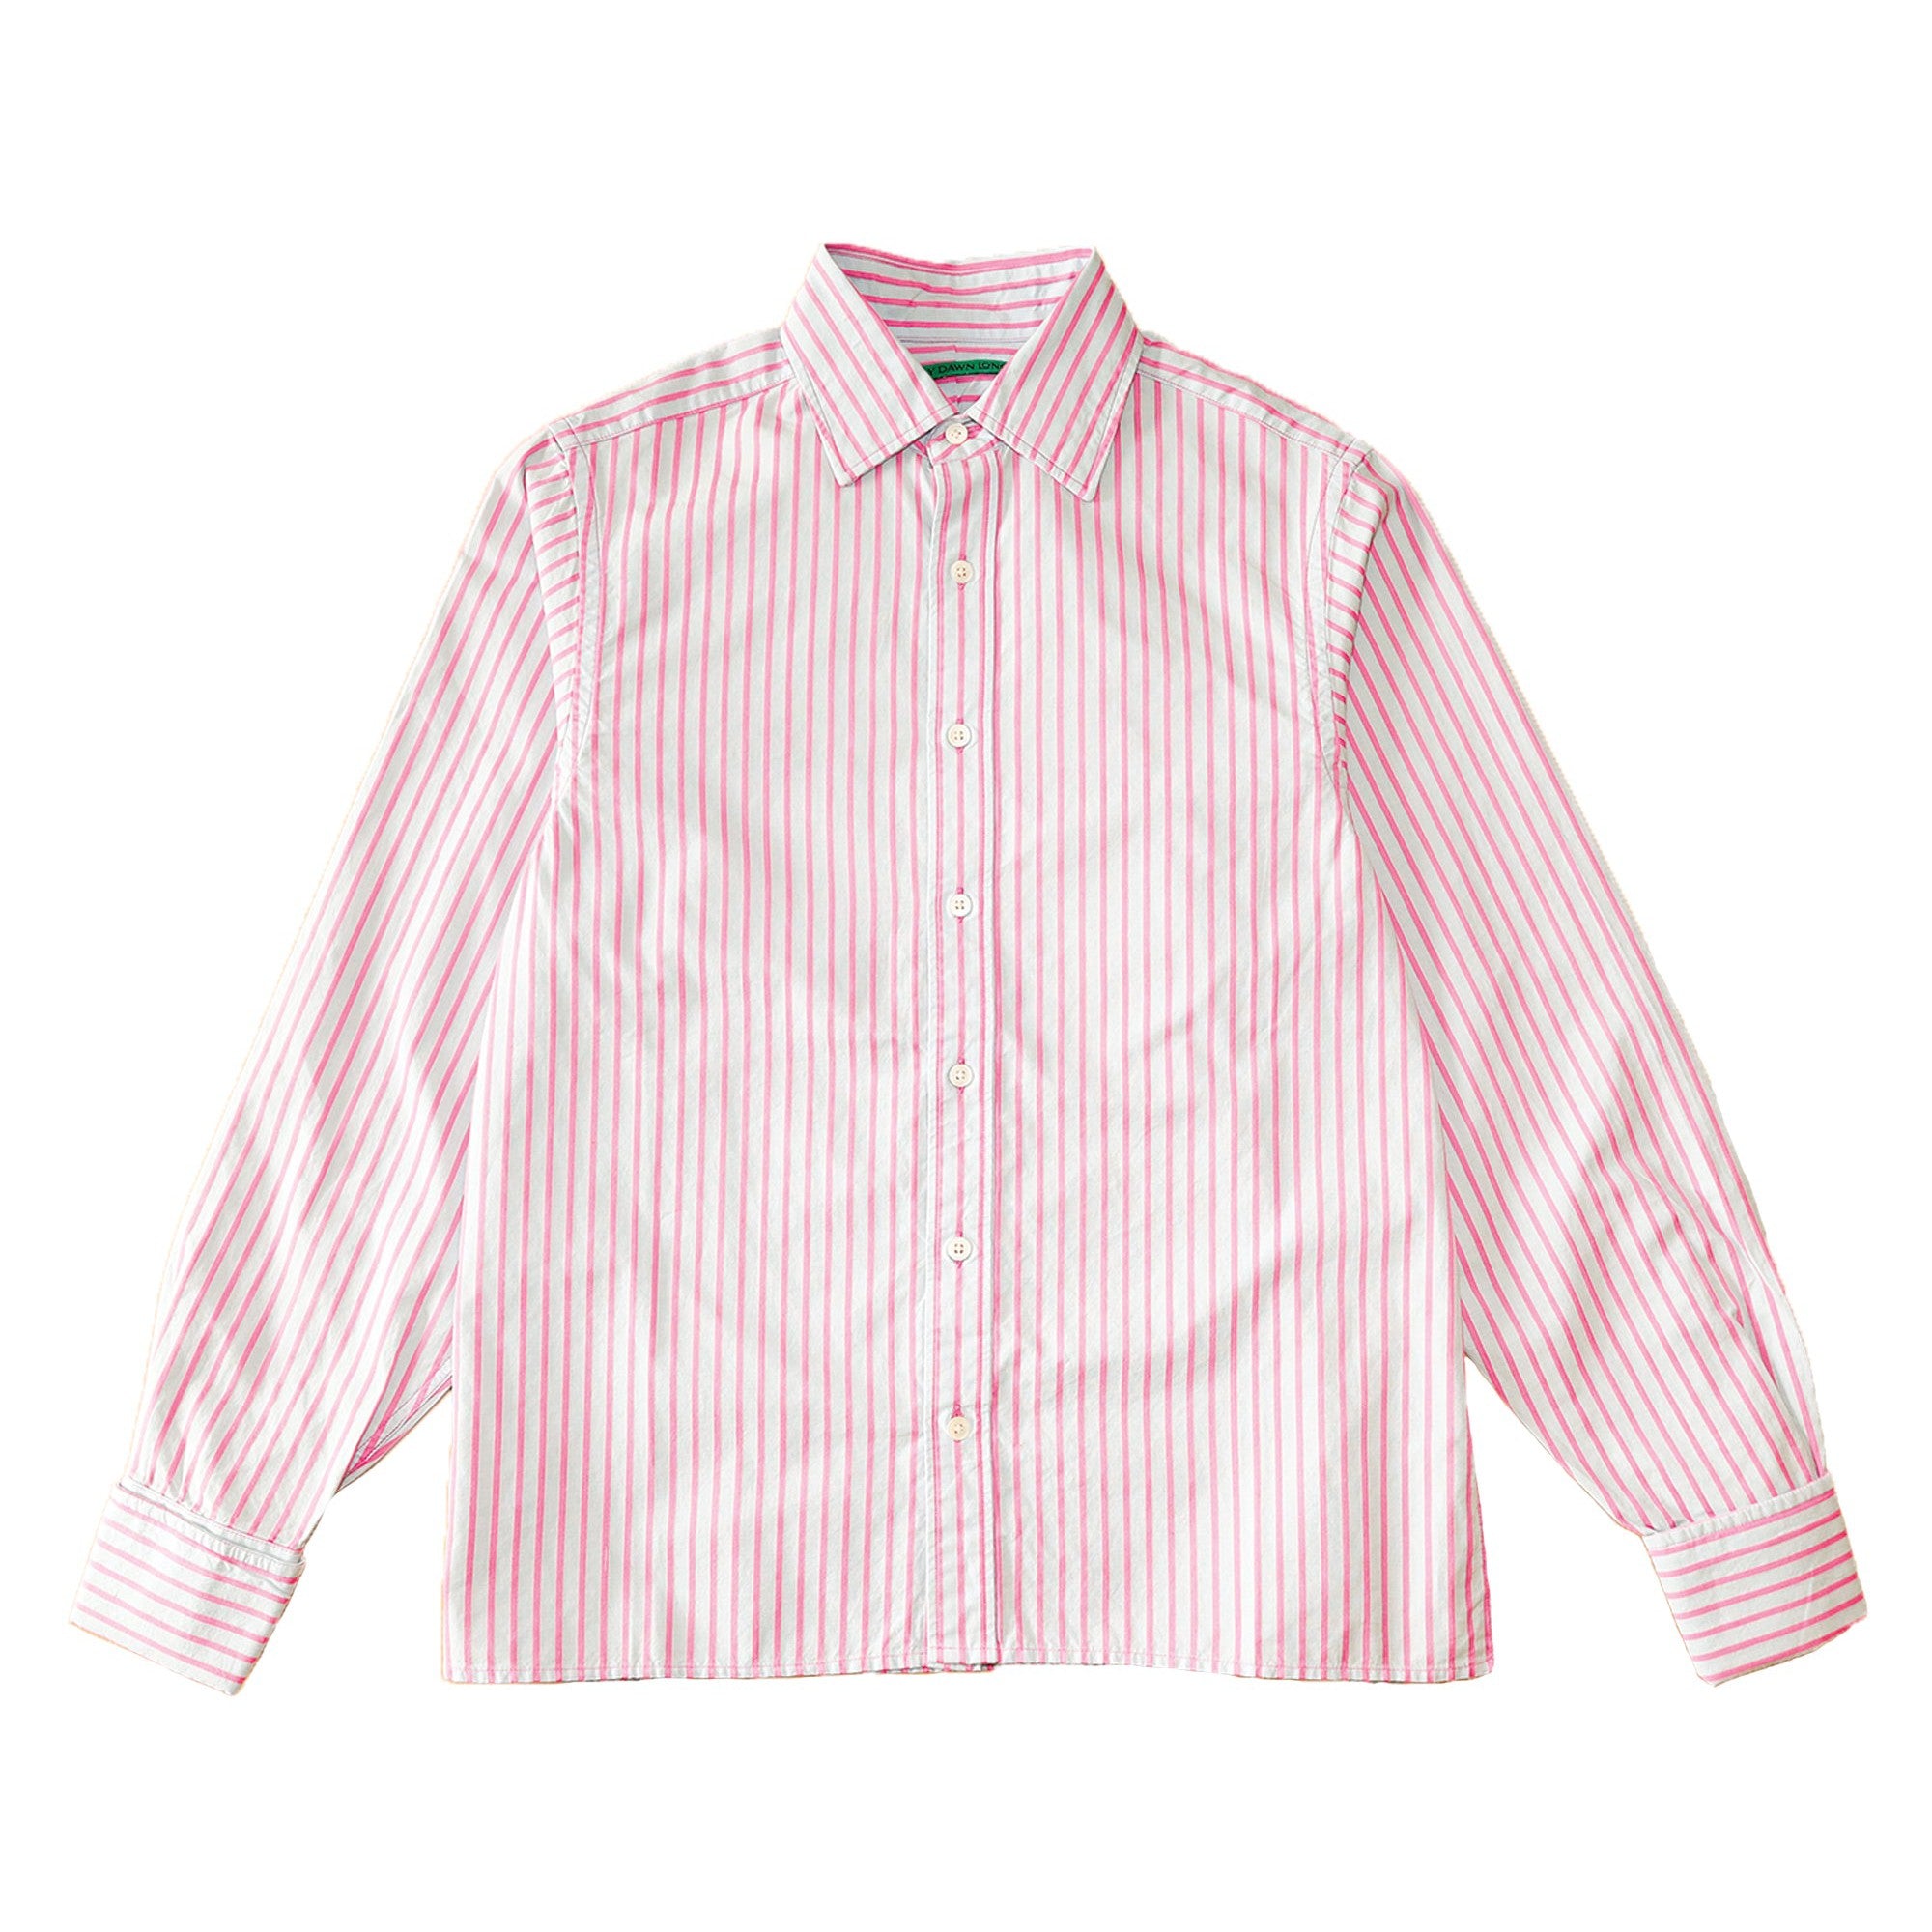 Jeff's Shirt - Pink and Blue Stripe